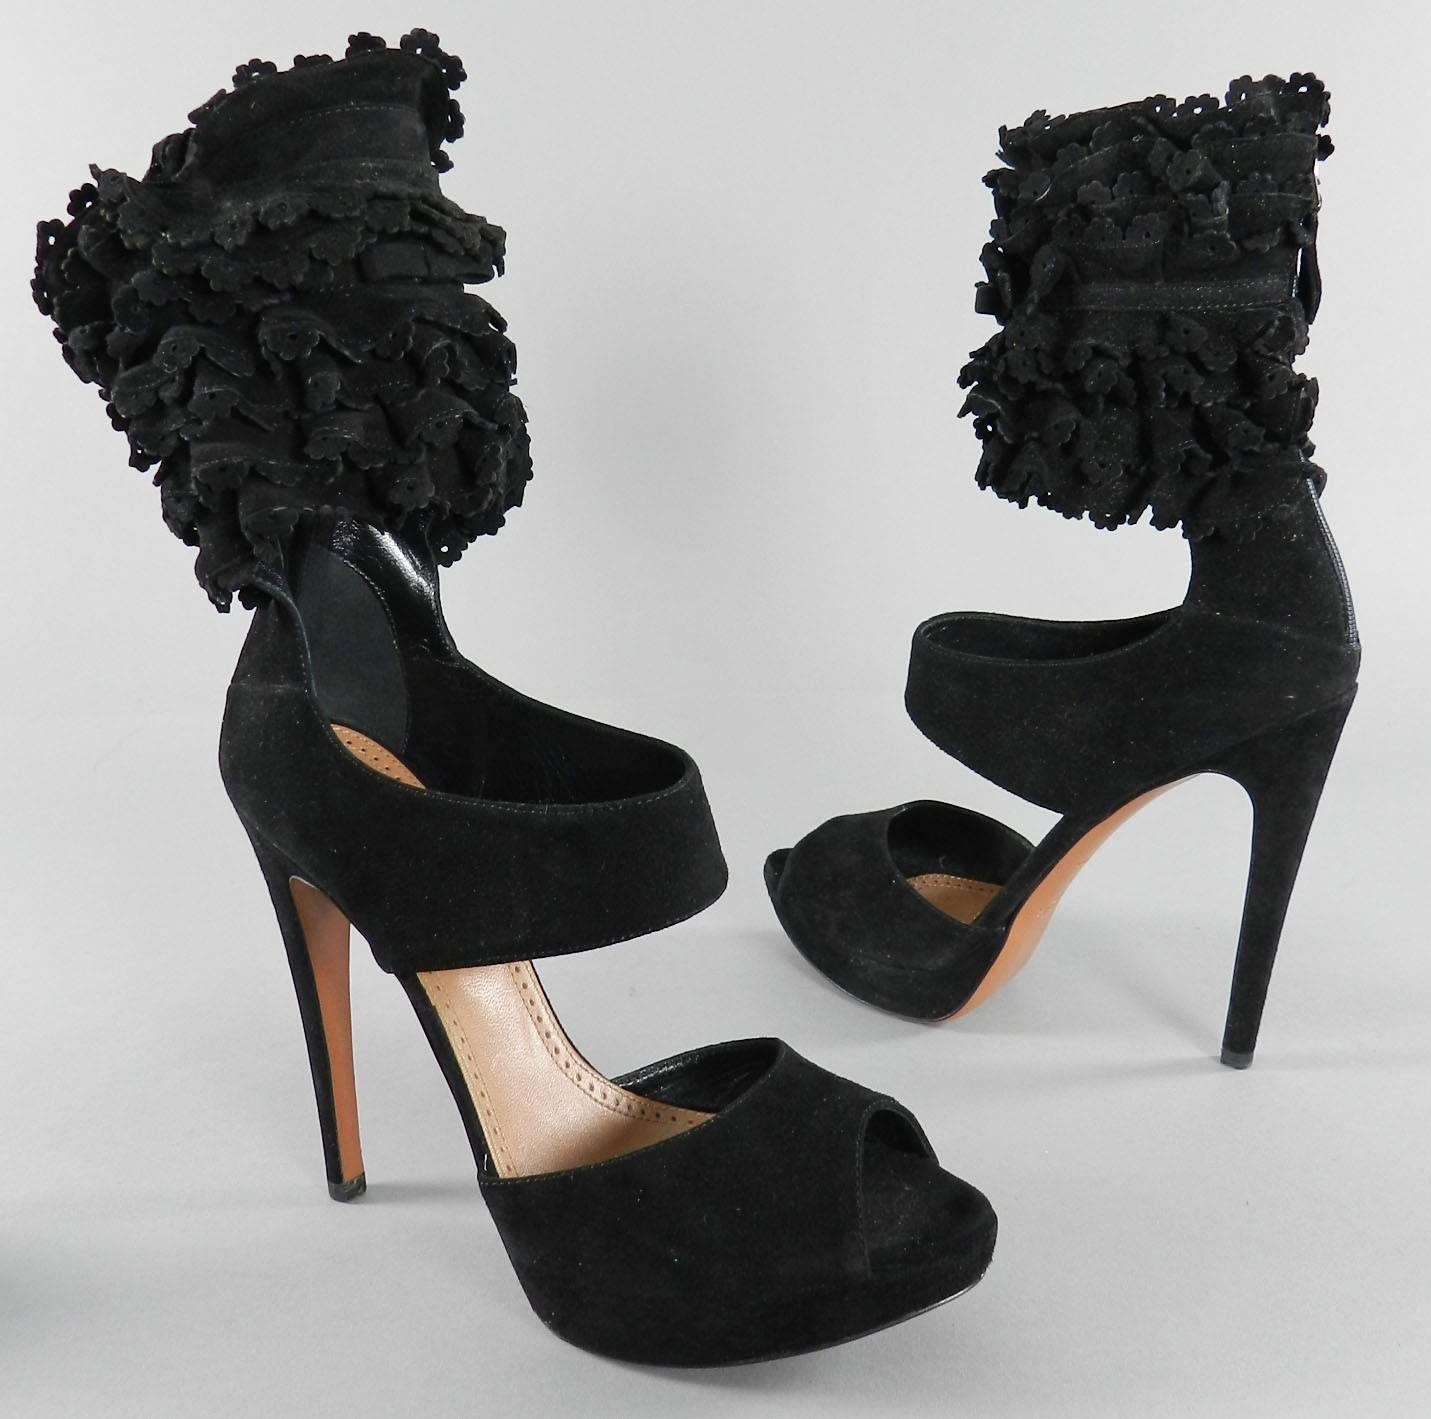 Alaia Black Suede Ruffle Ankle Heels - size 41 3